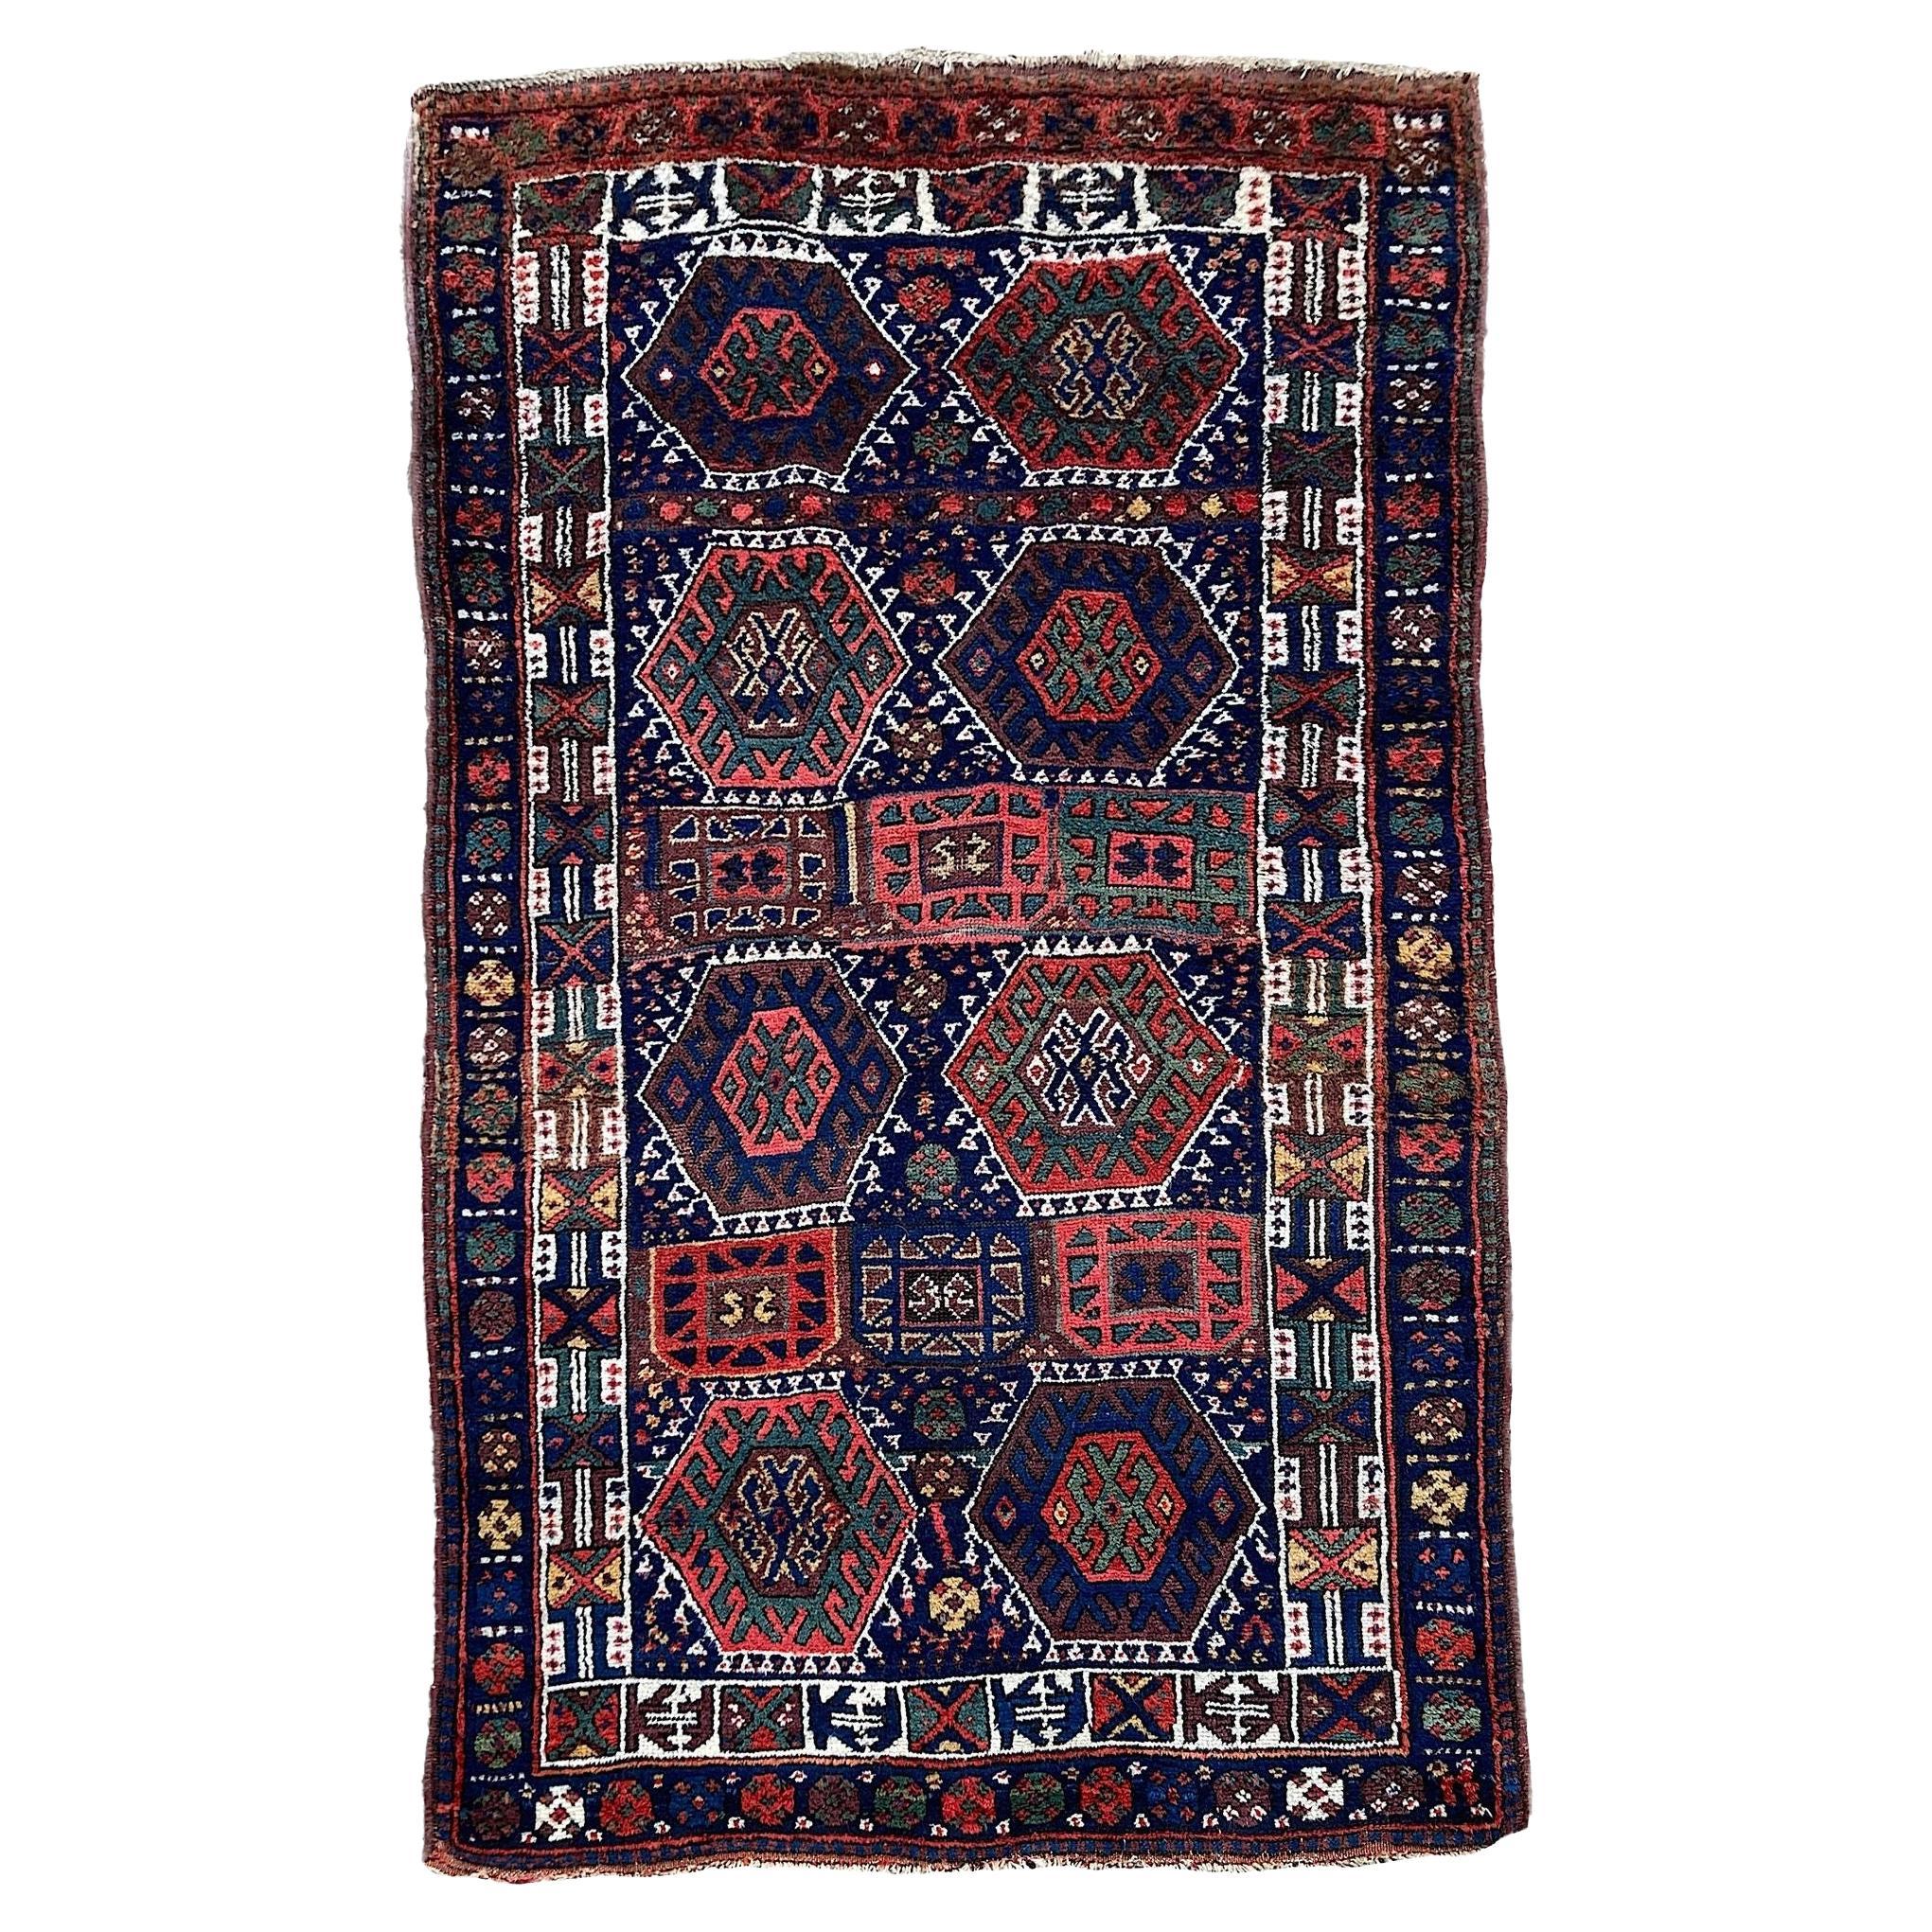 Early 1900s Rugs and Carpets